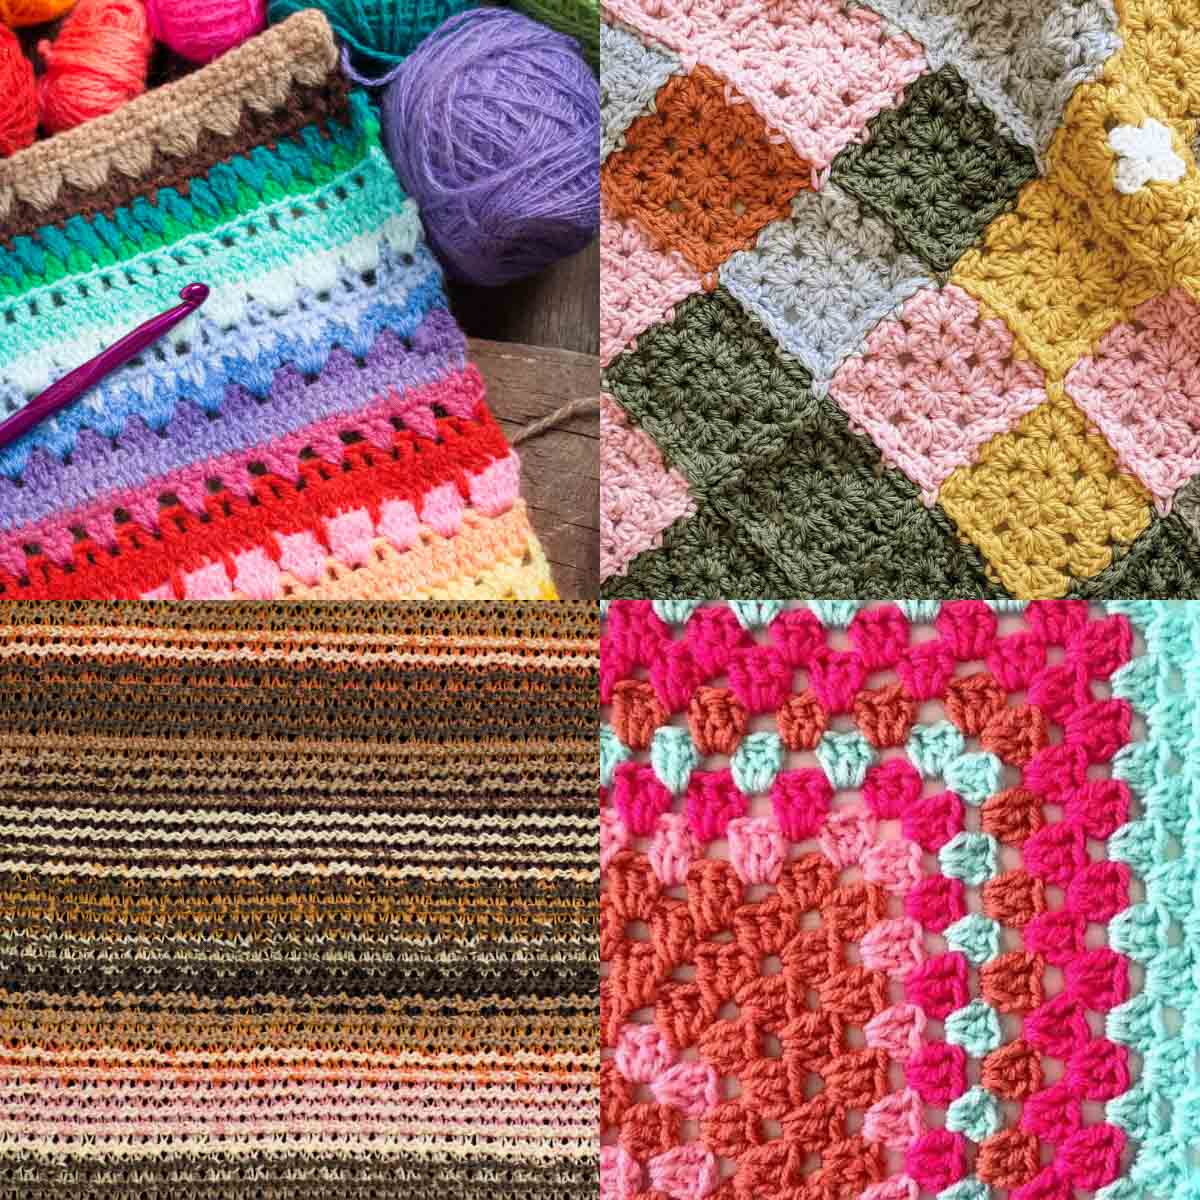 How To Design a Temperature Blanket + 25 Free Patterns